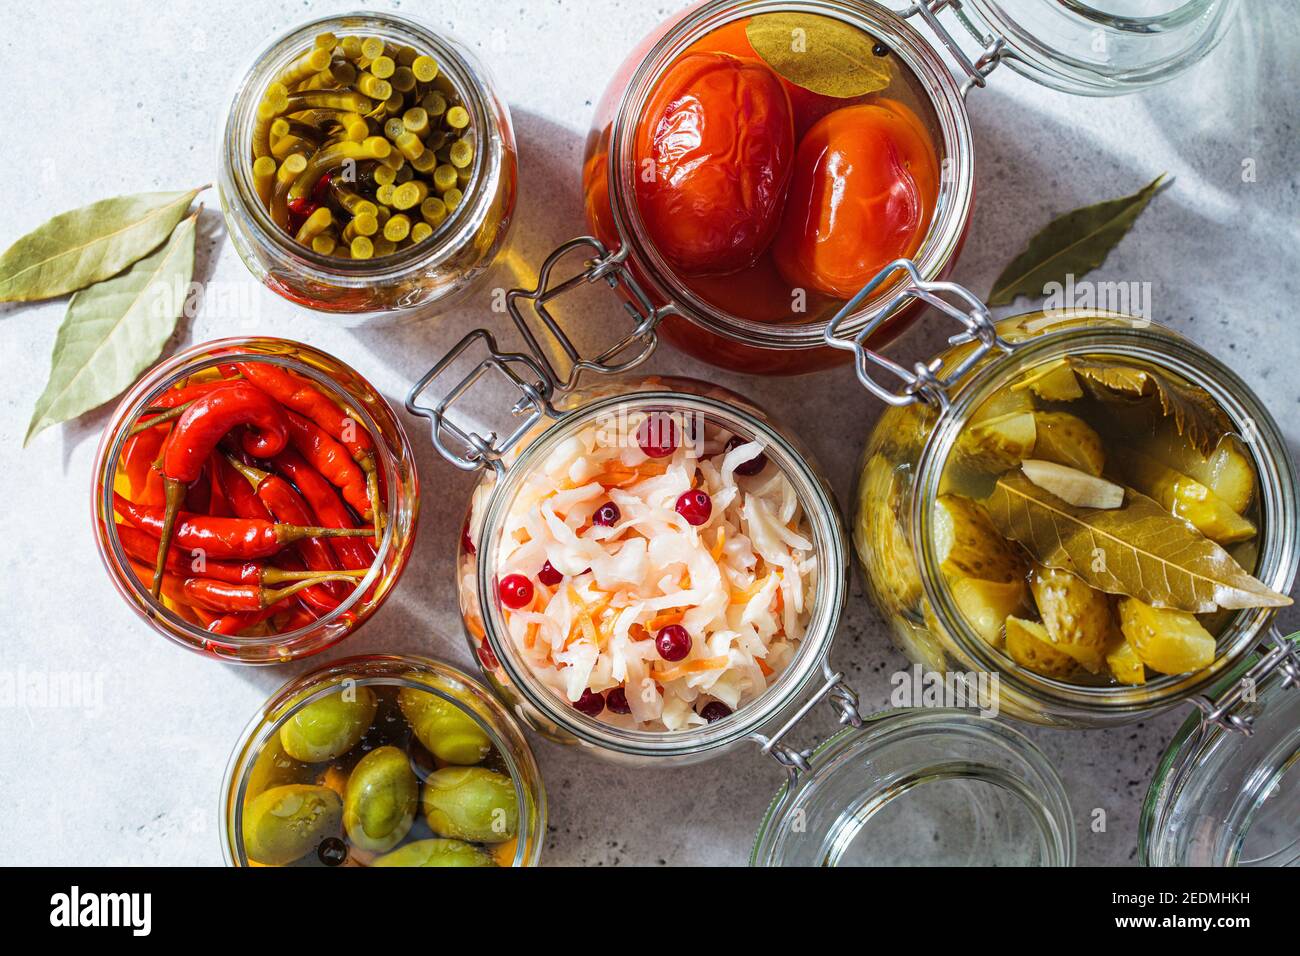 Homemade pickled or fermented vegetables - sauerkraut, wild garlic, chili, pickles, pickled tomatoes and olives in glass jars. Stock Photo